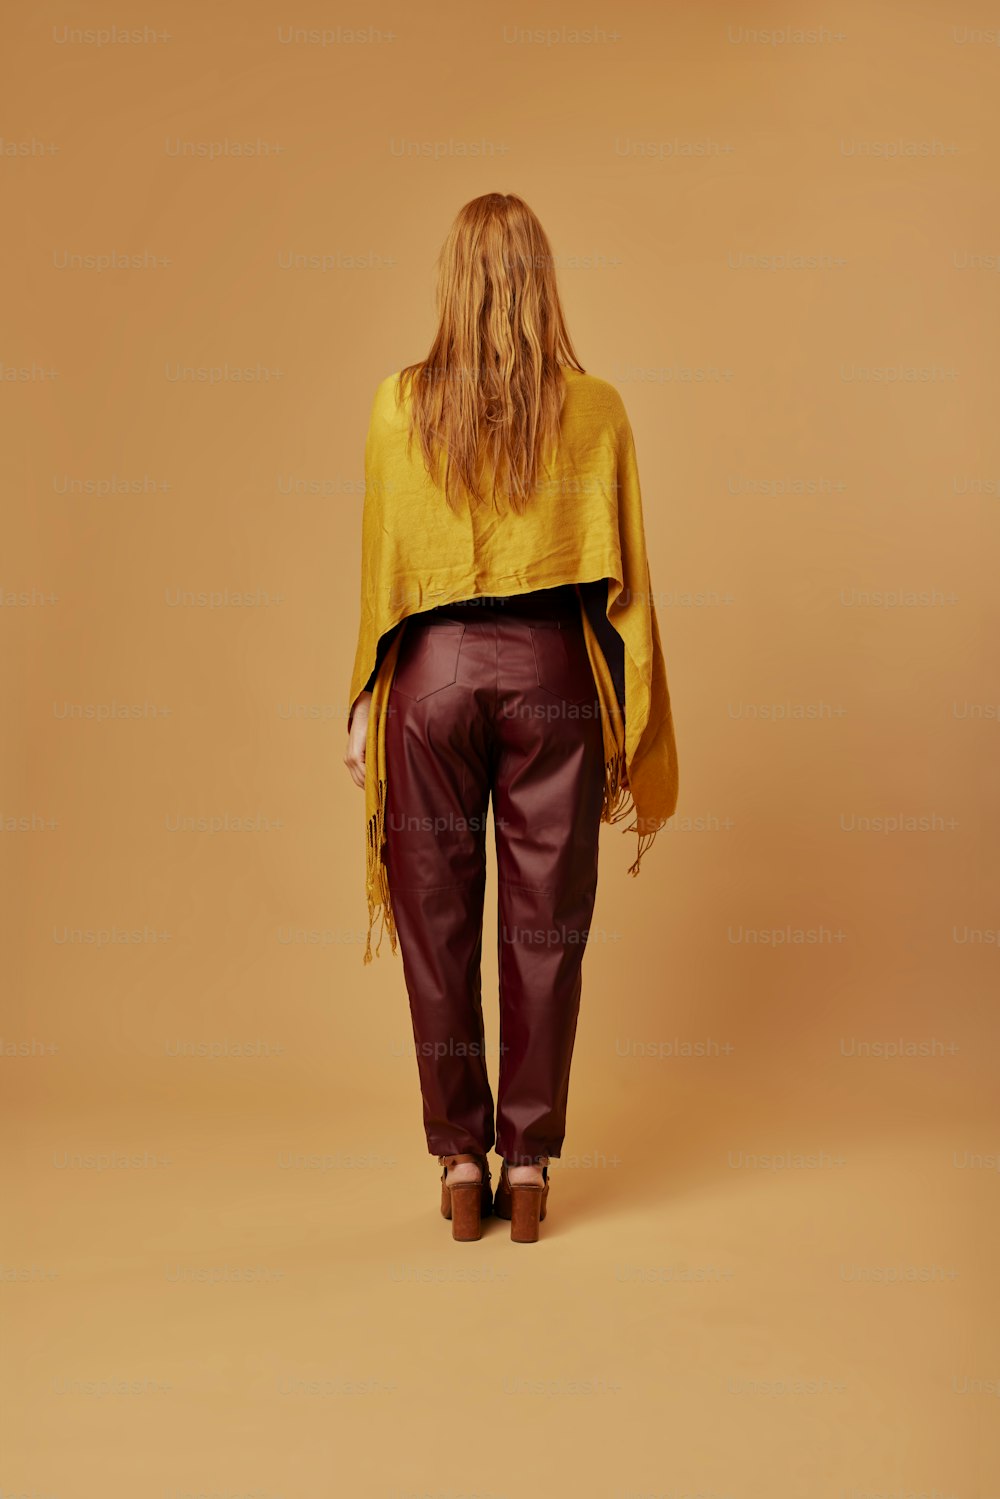 a woman in a yellow top and maroon pants